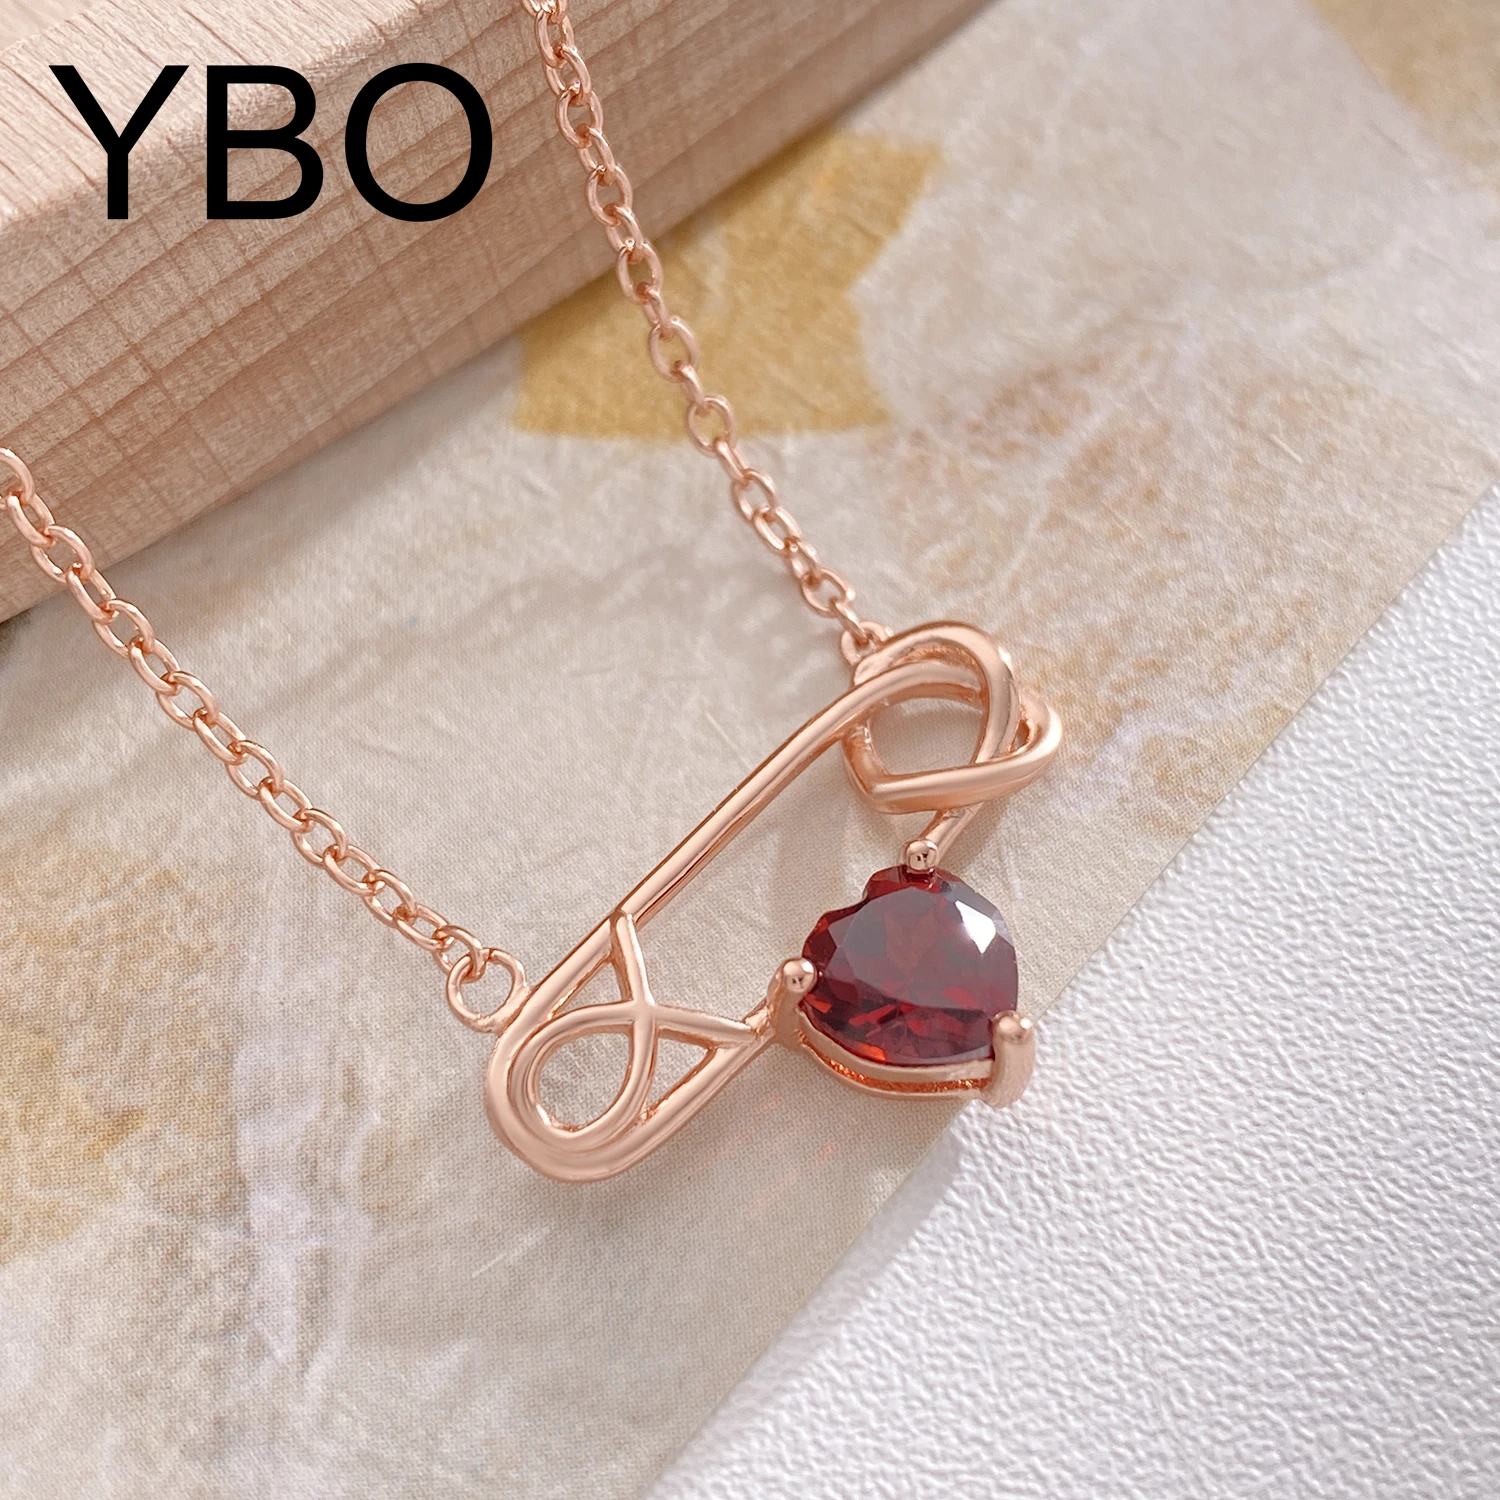 

YBO Geometric Heart Paperclip Pendants 18K Rose Gold Plate Natural Red Garnet Necklaces Clavicle Chains Fine Jewelry For Women